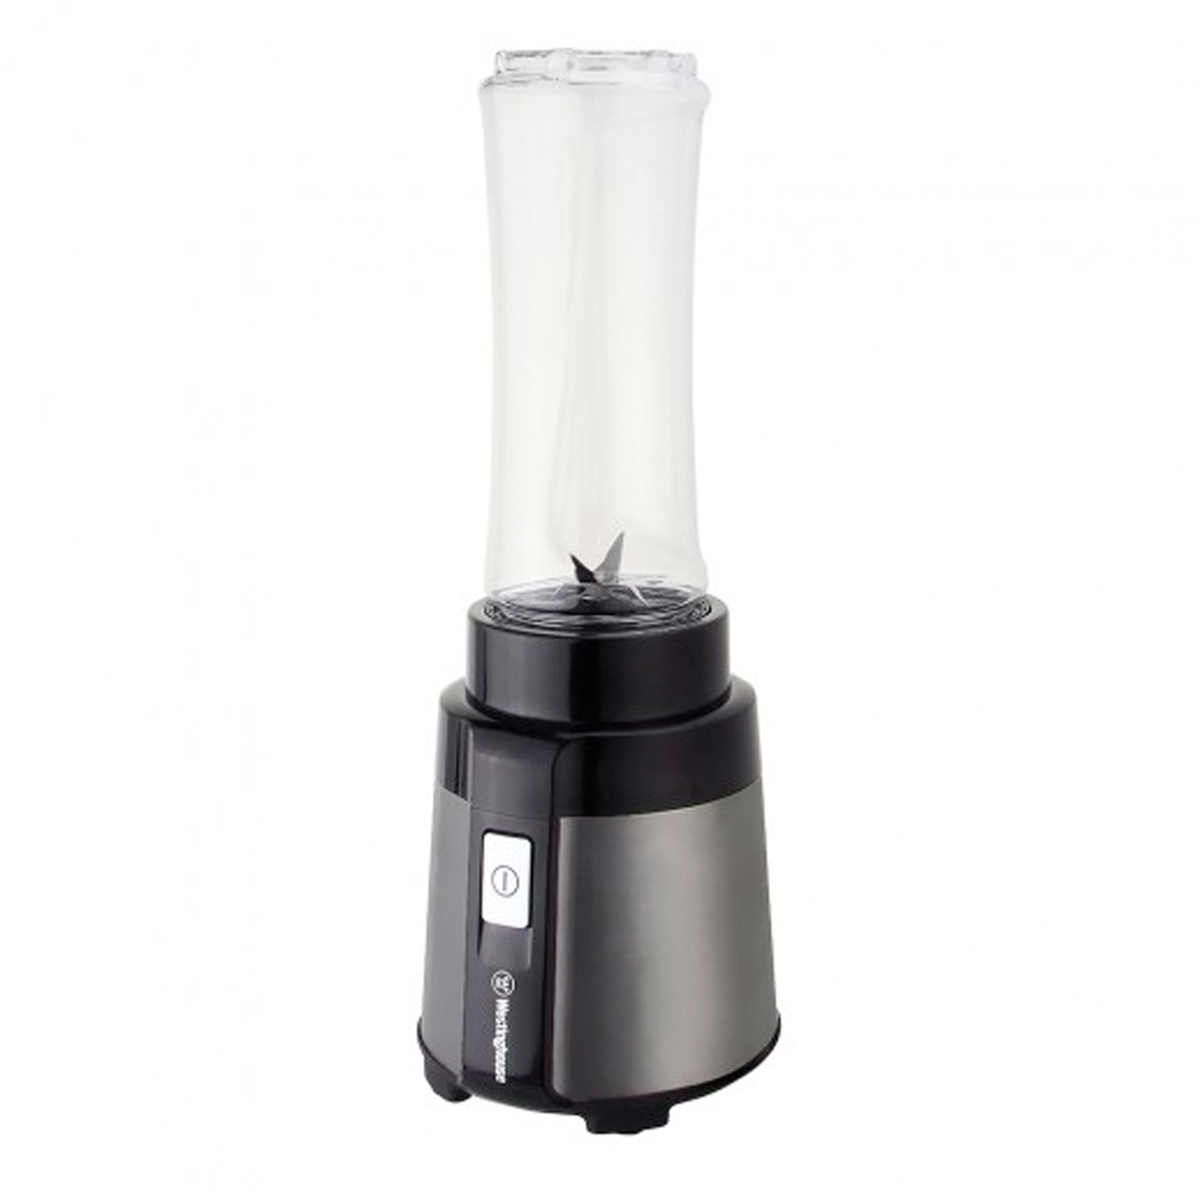 Westinghouse Smoothie Maker WKBE09GY 250W